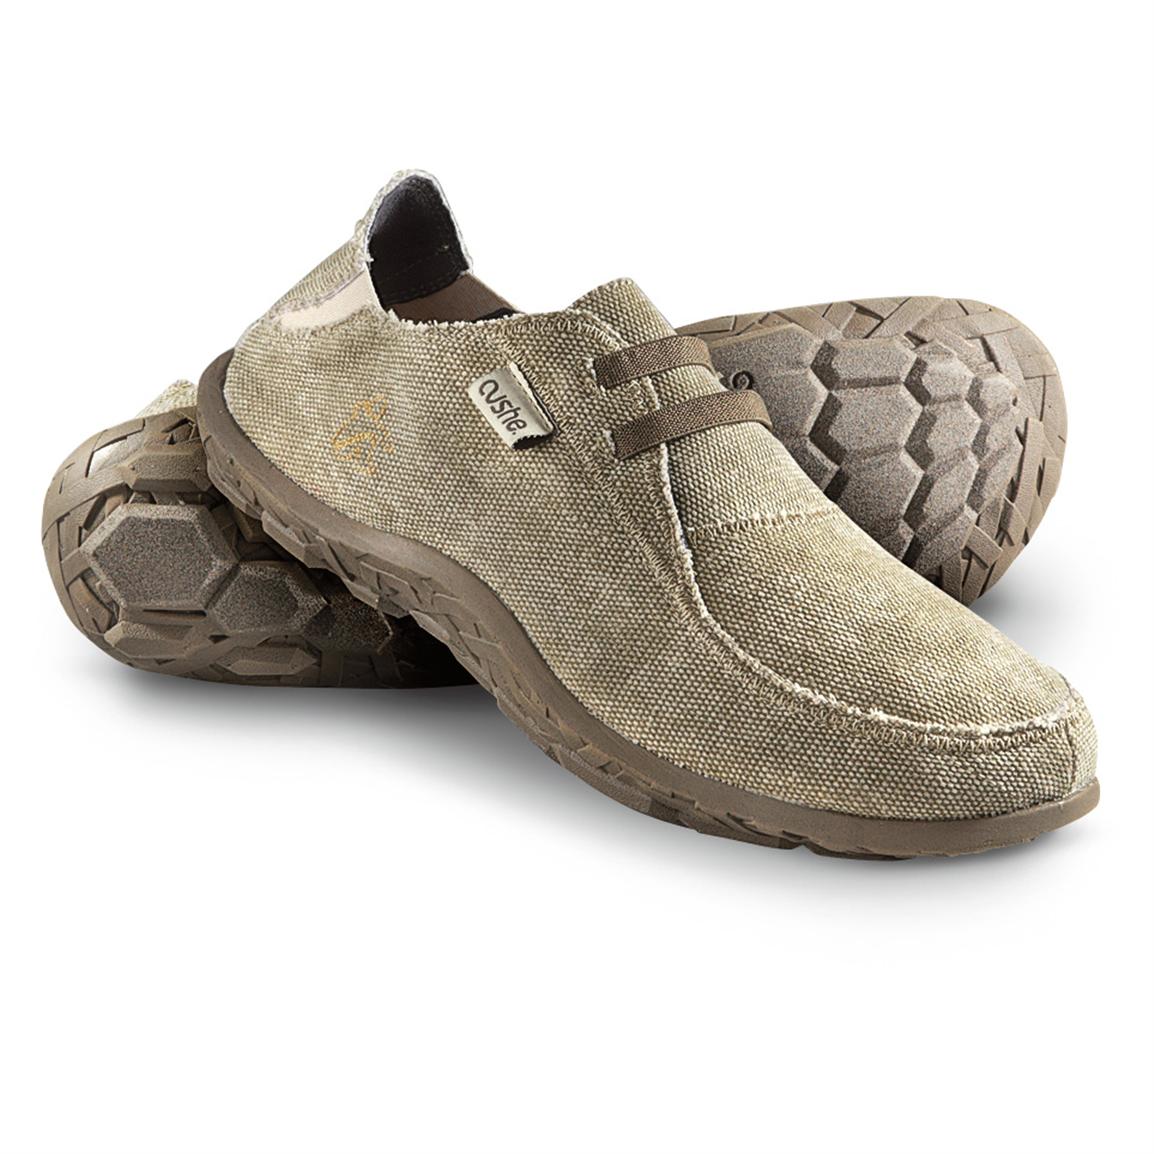 Men's Cushe Moc Shoes - 579314, Casual Shoes at Sportsman's Guide